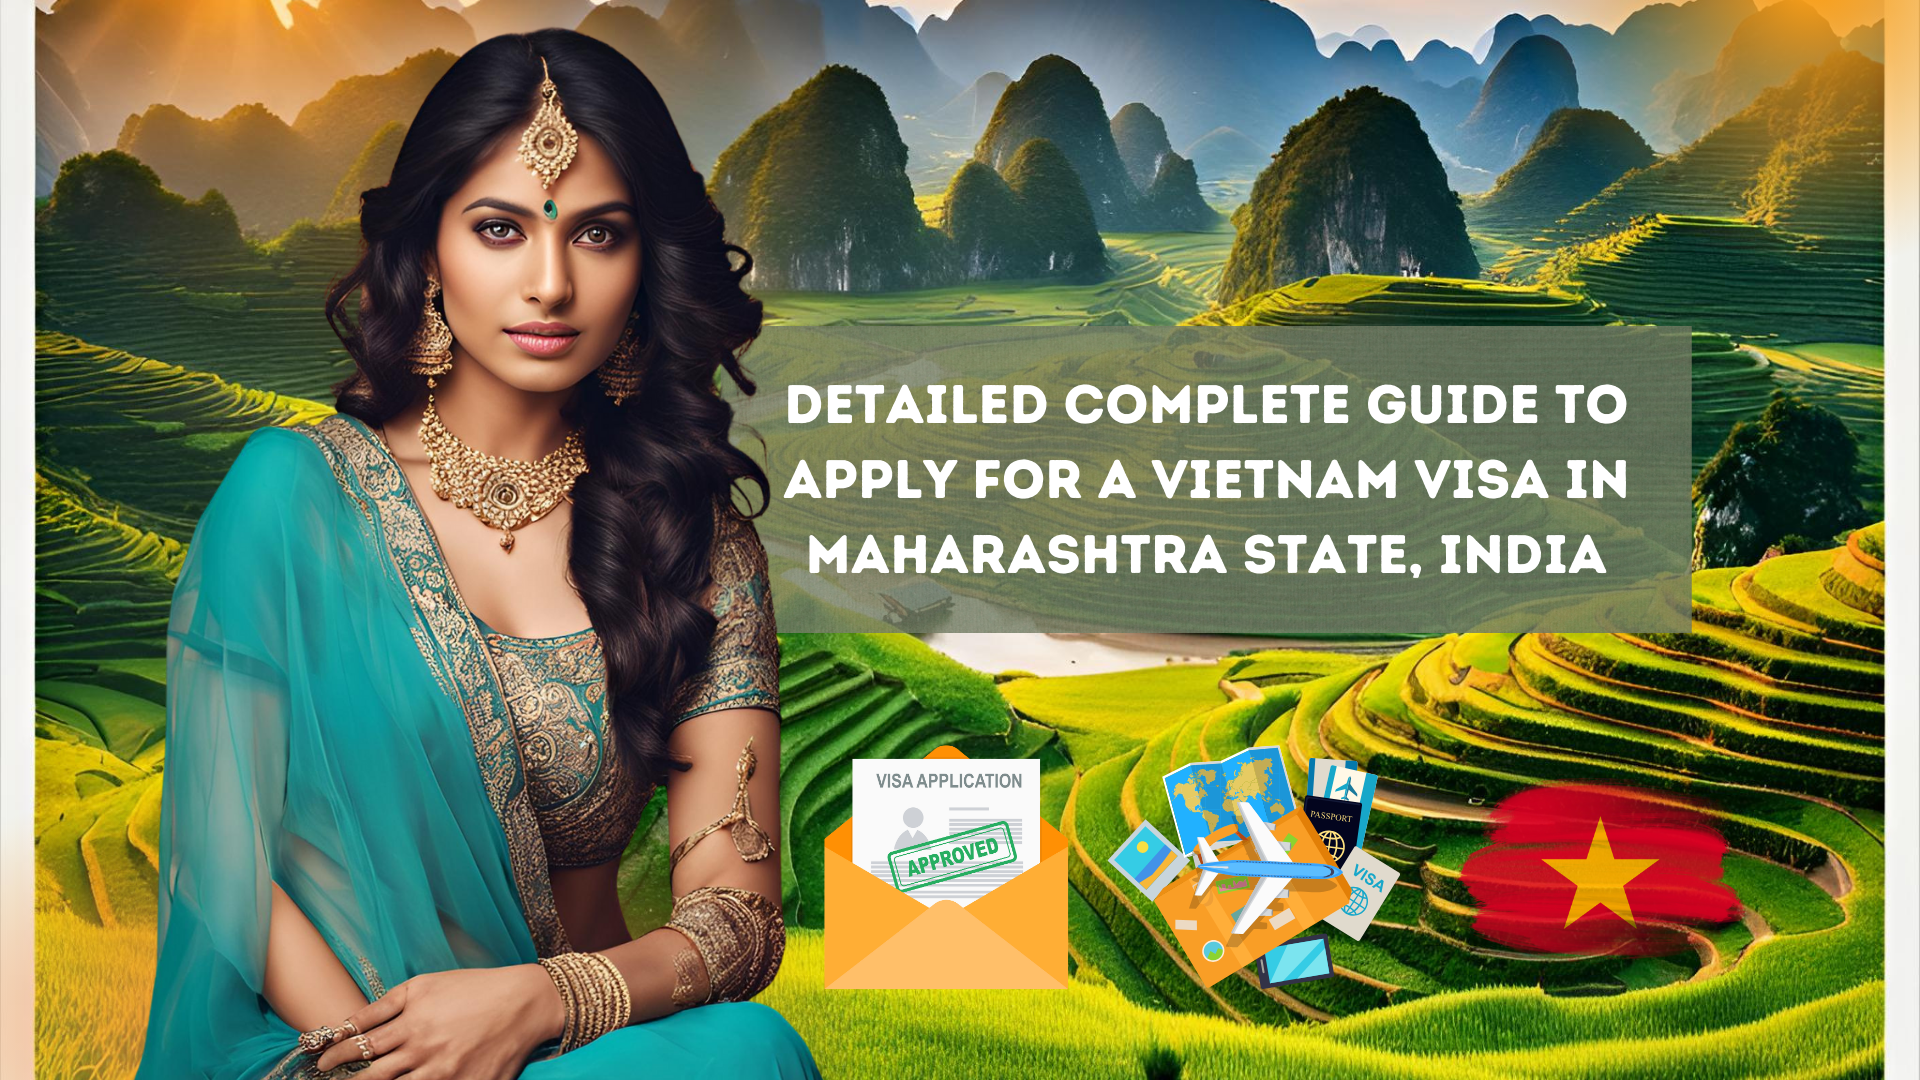 Detailed Complete Guide to Apply for a Vietnam Visa in Maharashtra State, India